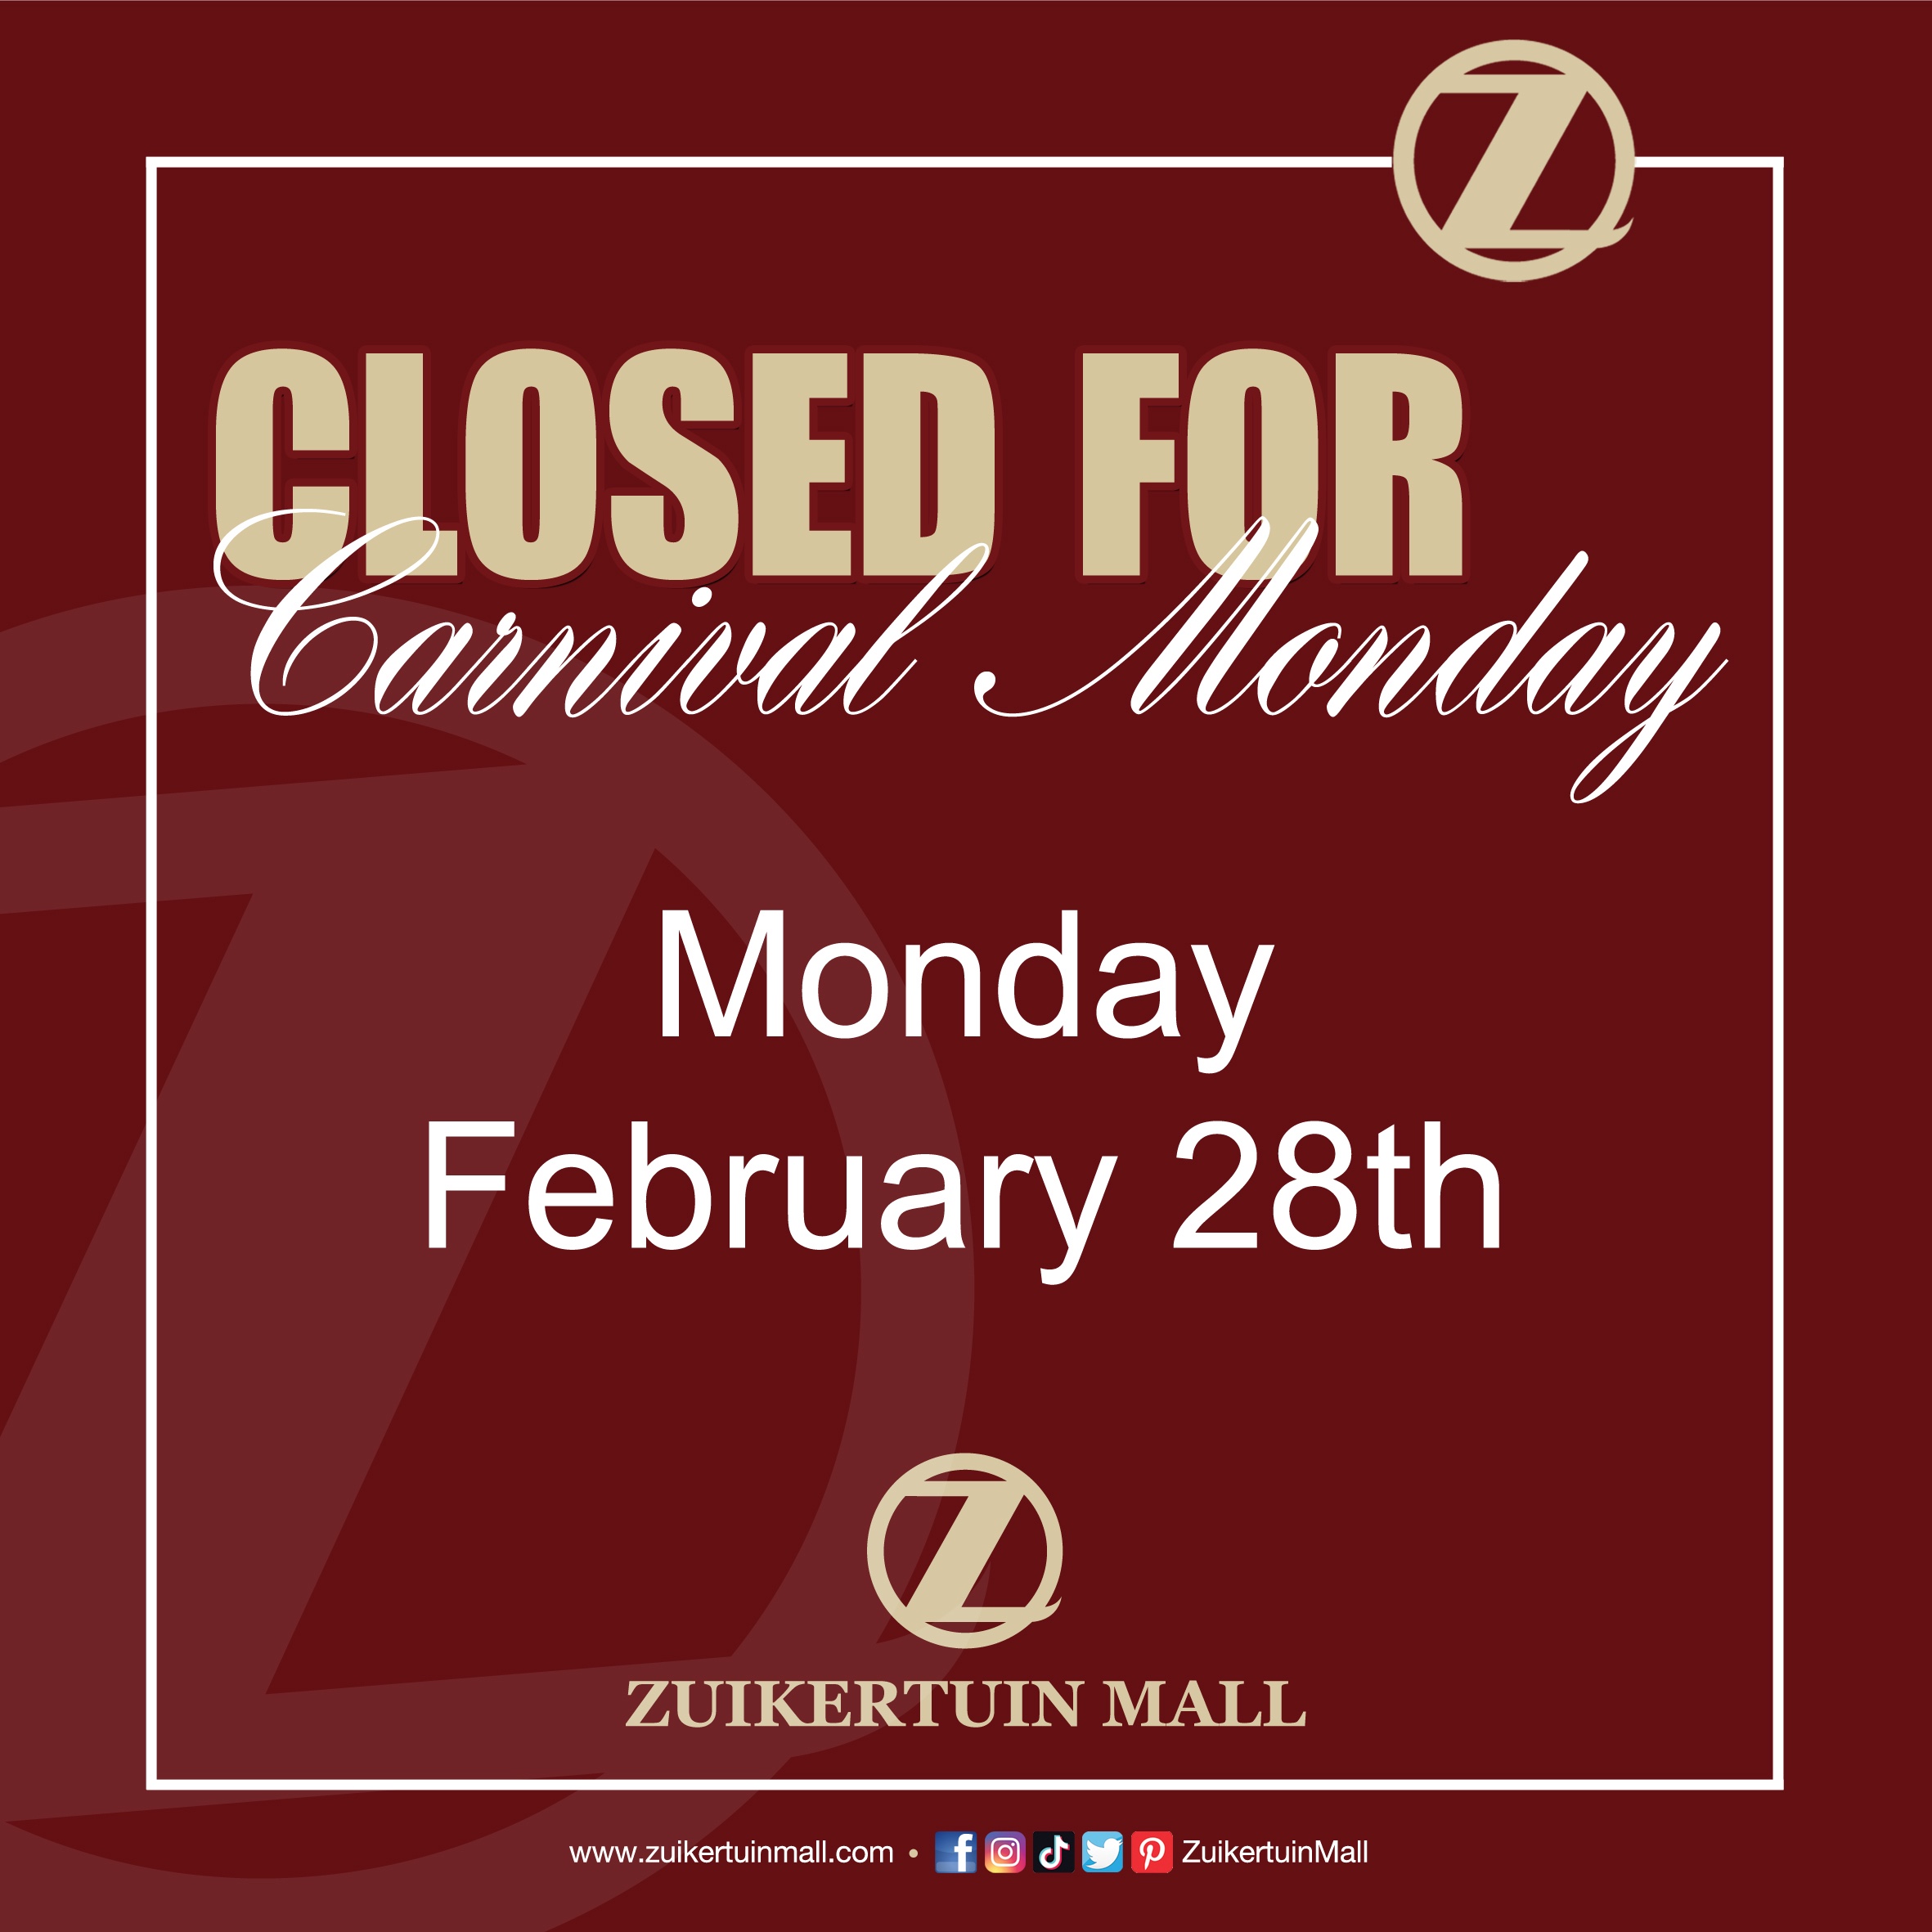 Zuikertuintje is closed for Carnival Monday